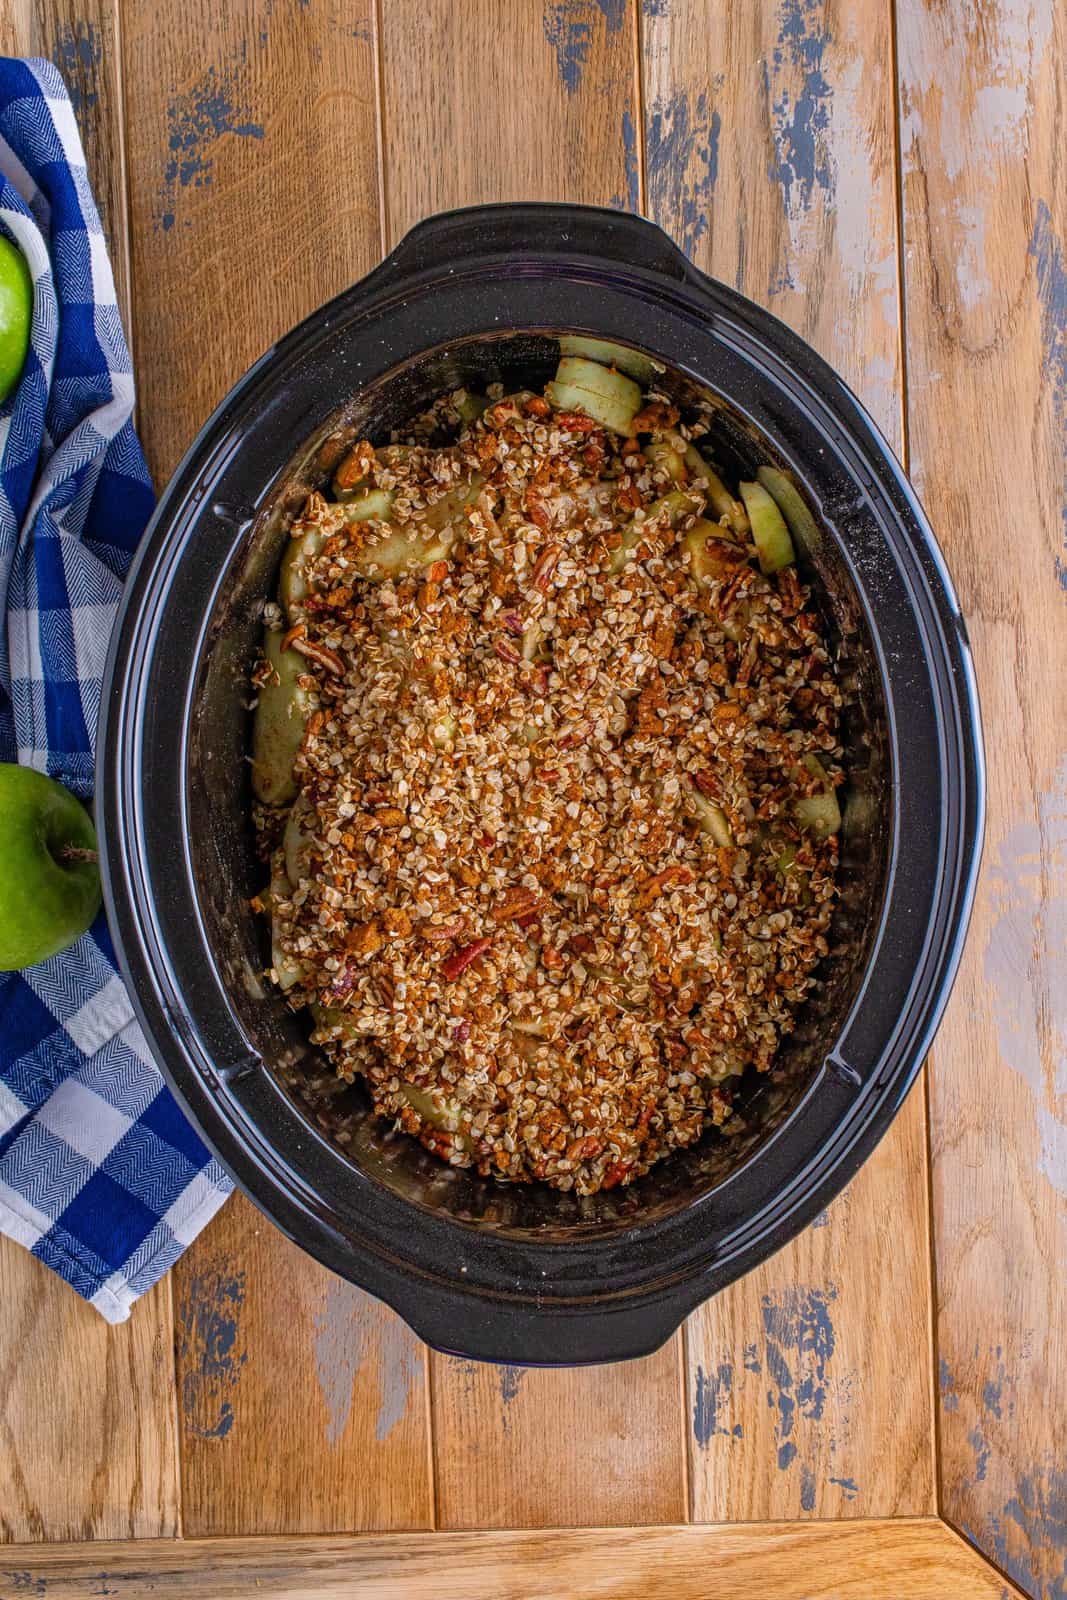 oatmeal topping sprinkled over sliced apple mixture in an oval slow cooker.